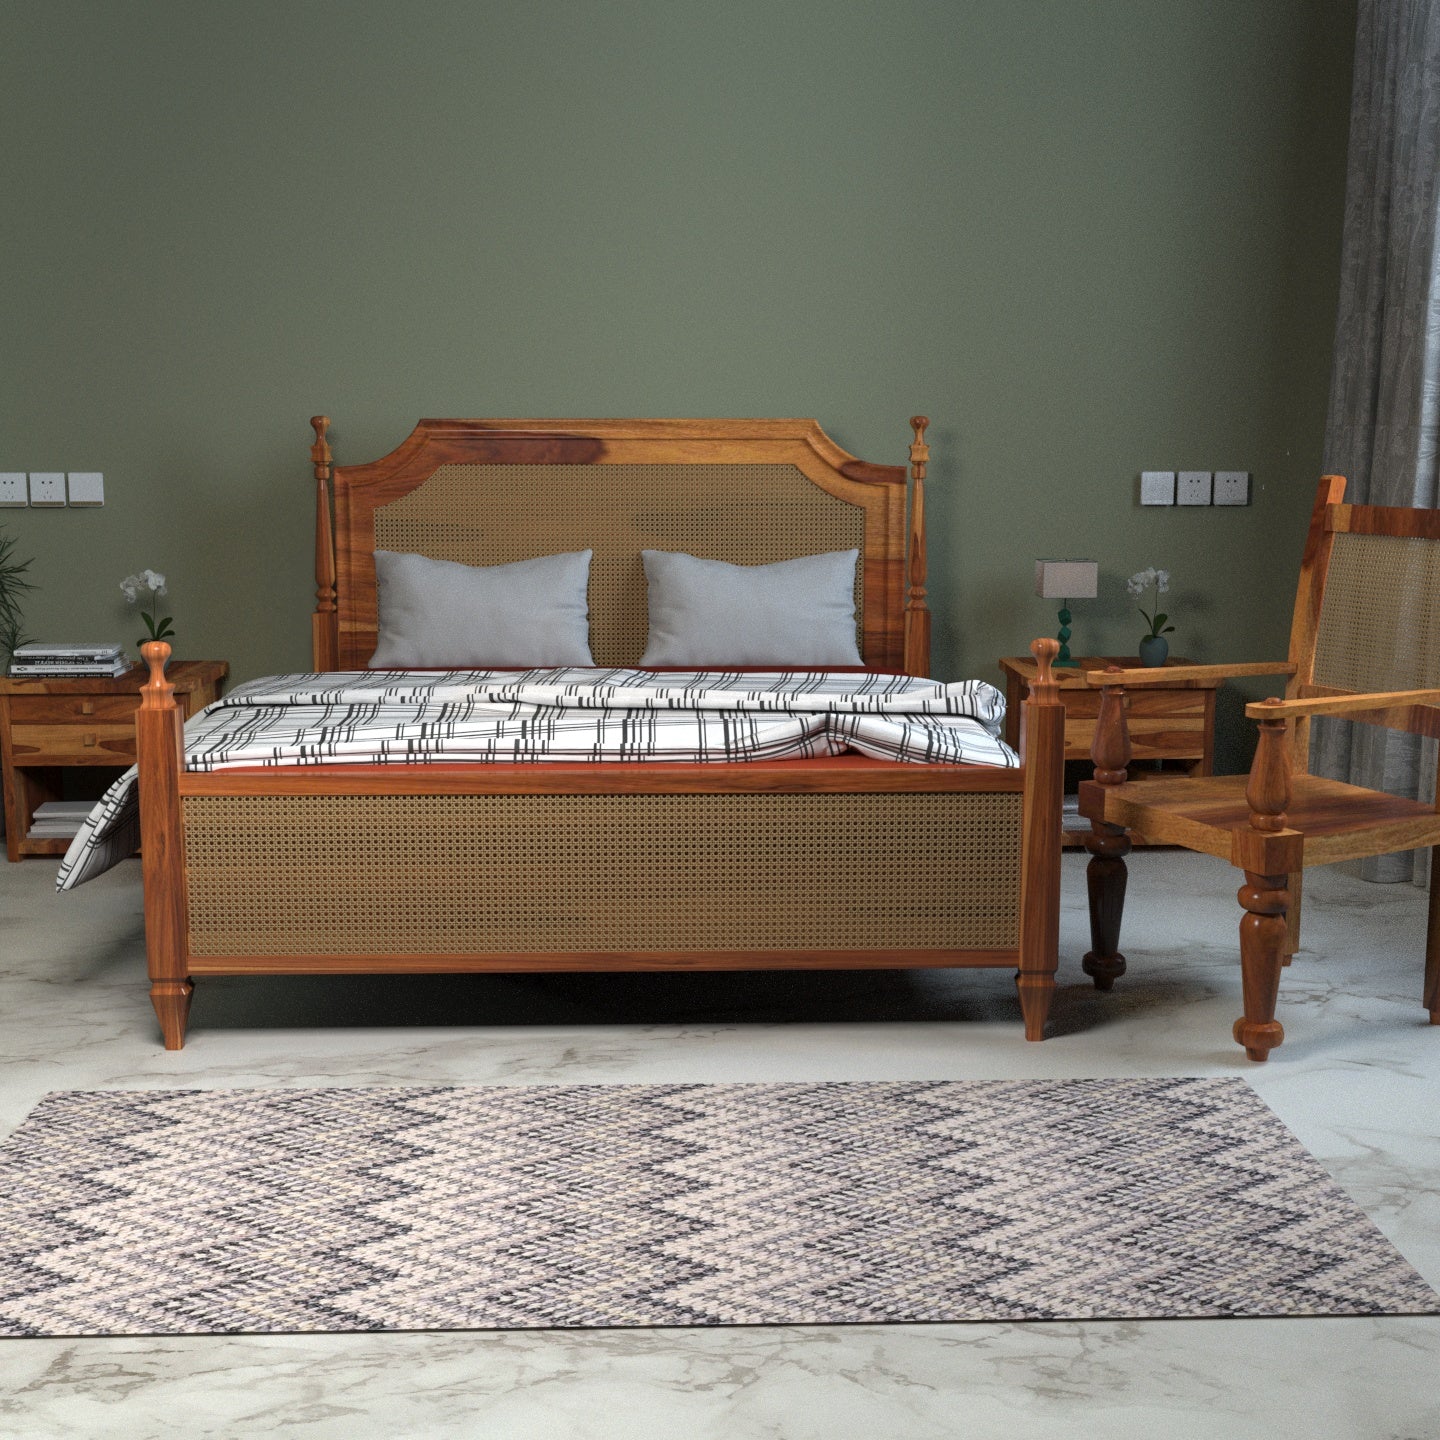 Indian Simple Decent Handmade Wooden Bed with Classic Arm Chair Bedroom Furniture Sets